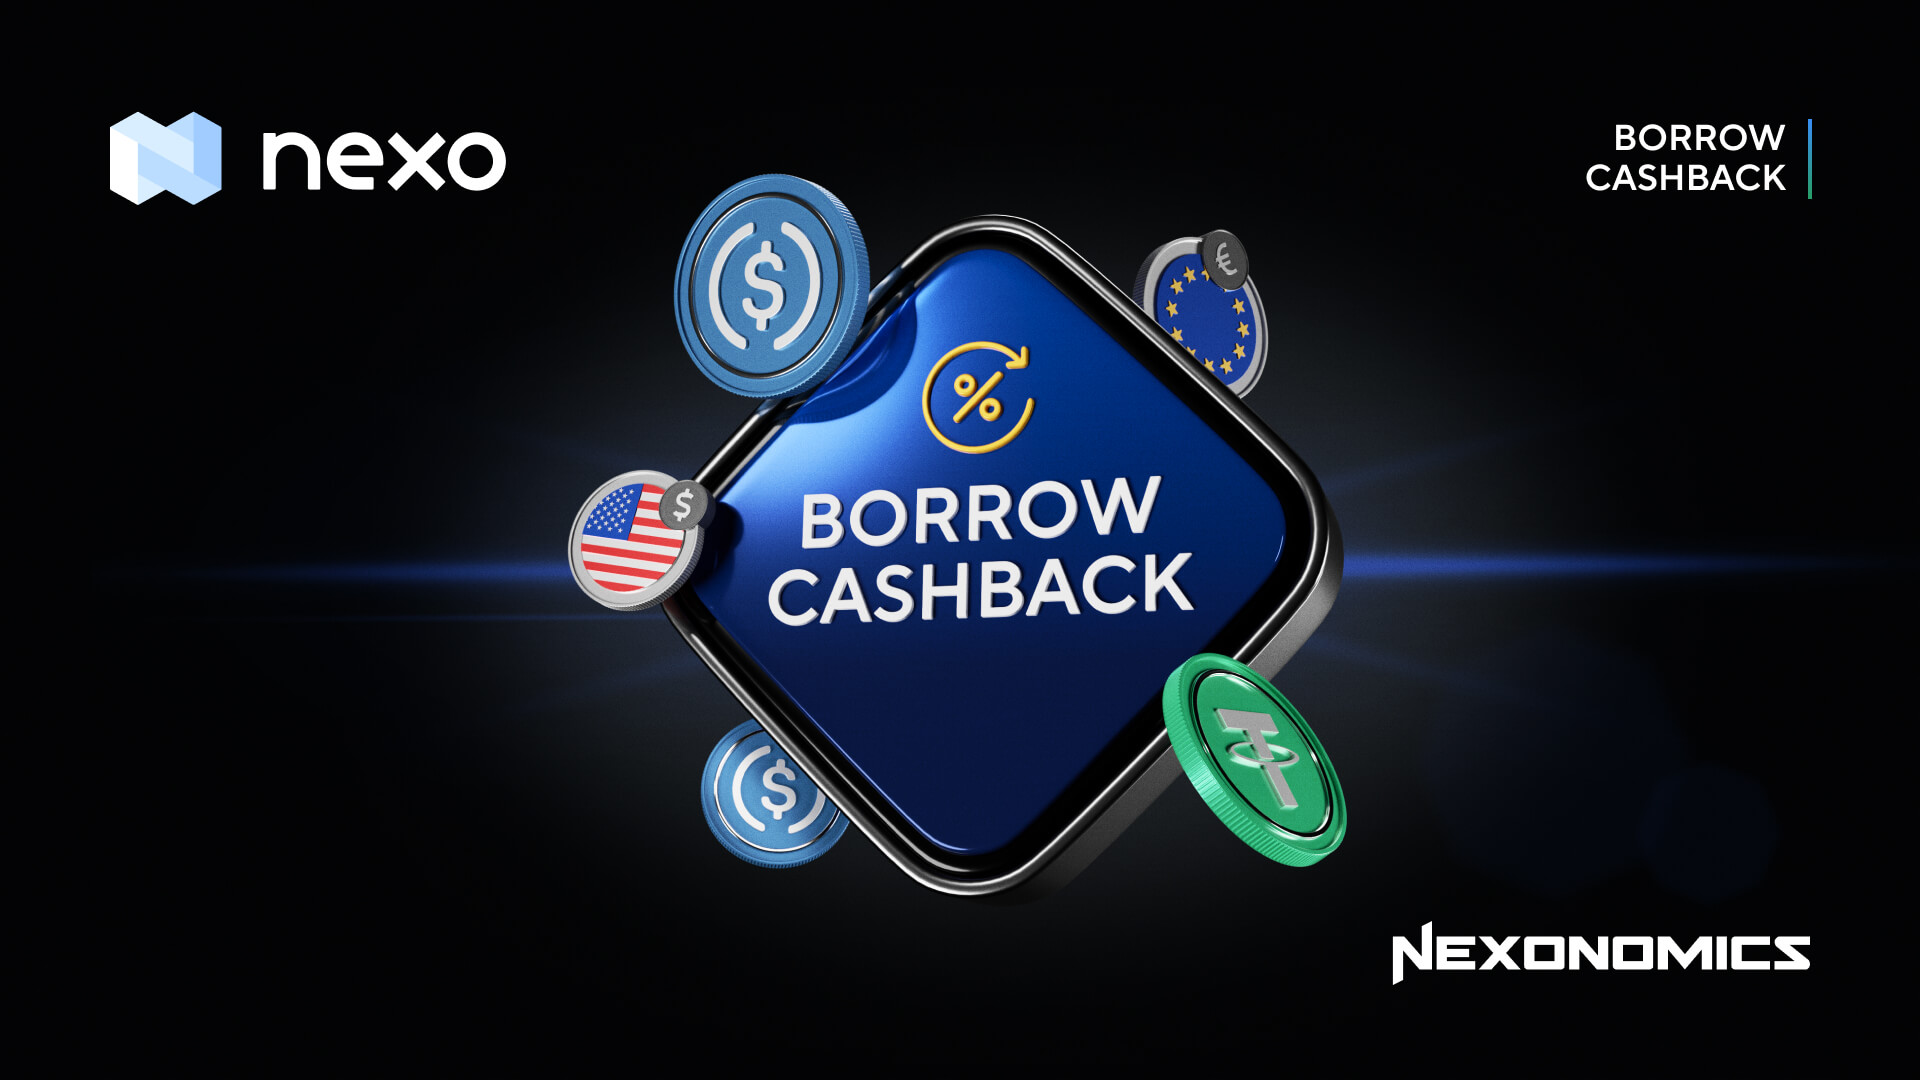 Limited Offer: Borrow at 6.9% & Get 0.5% Cashback